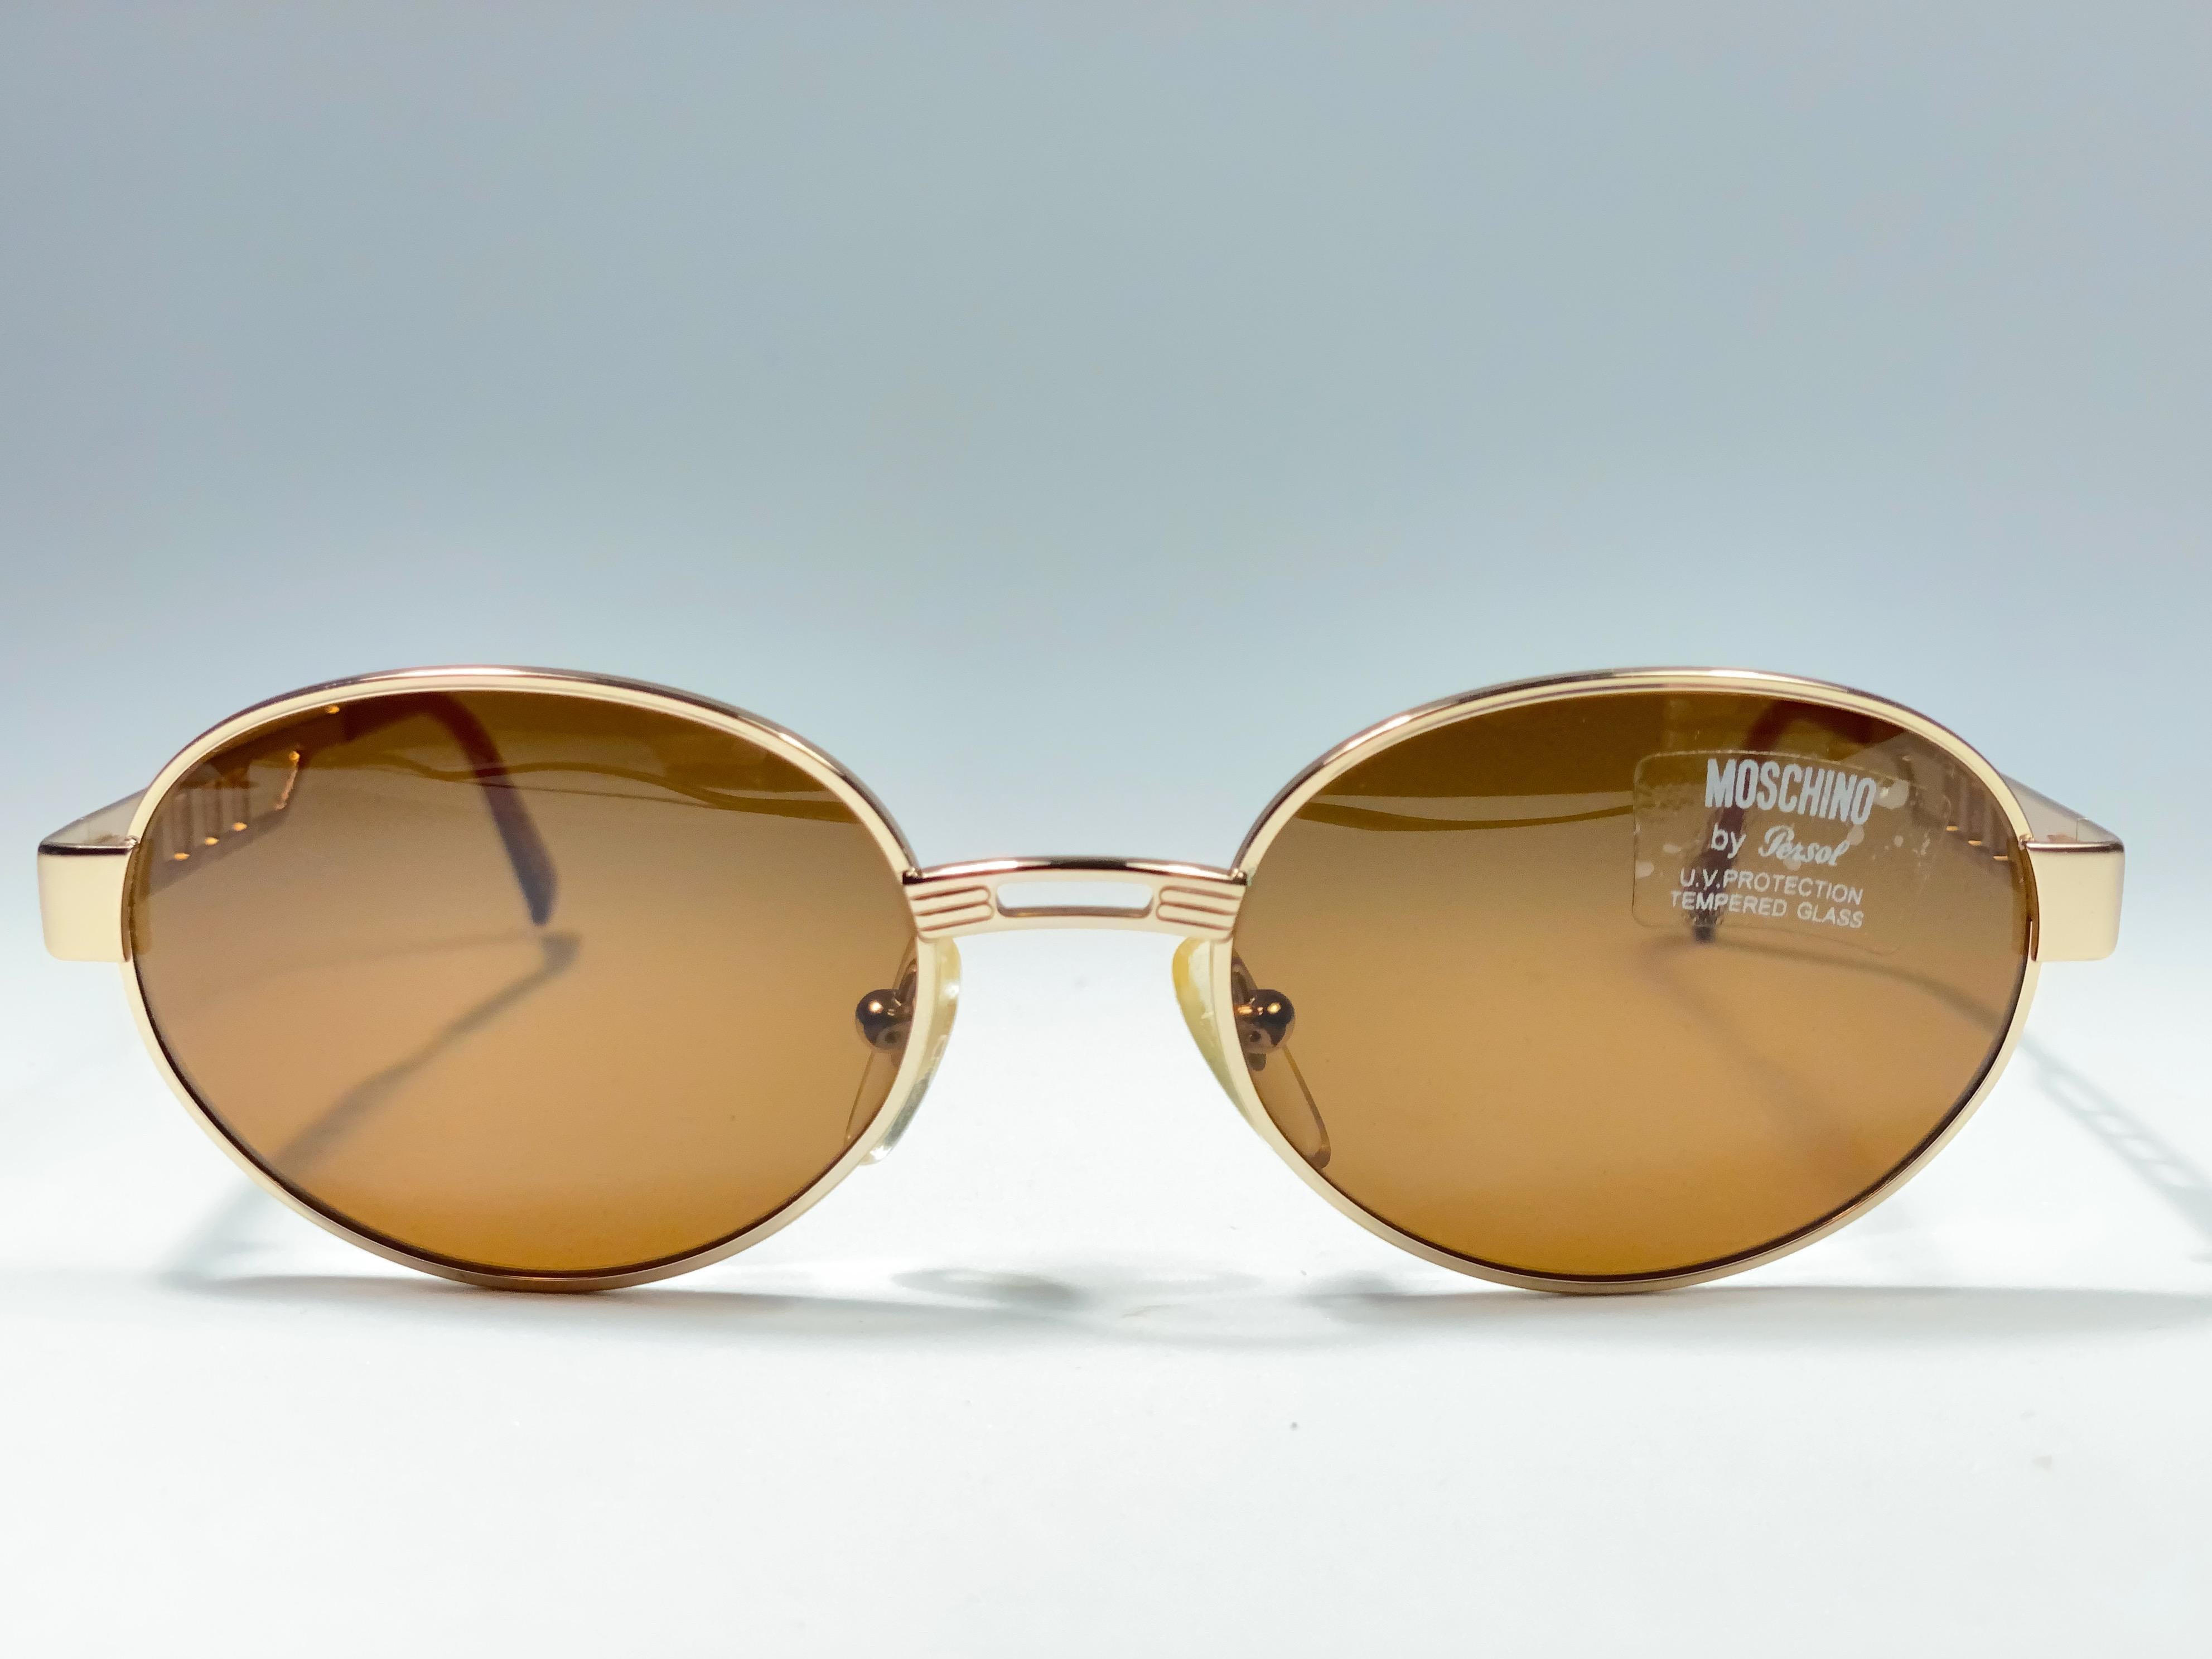 New Vintage Moschino medium size adorned frame. Spotless brown lenses.

Made in Italy.
 
Produced and design in 1990's.

This item may show minor sign of wear due to storage.